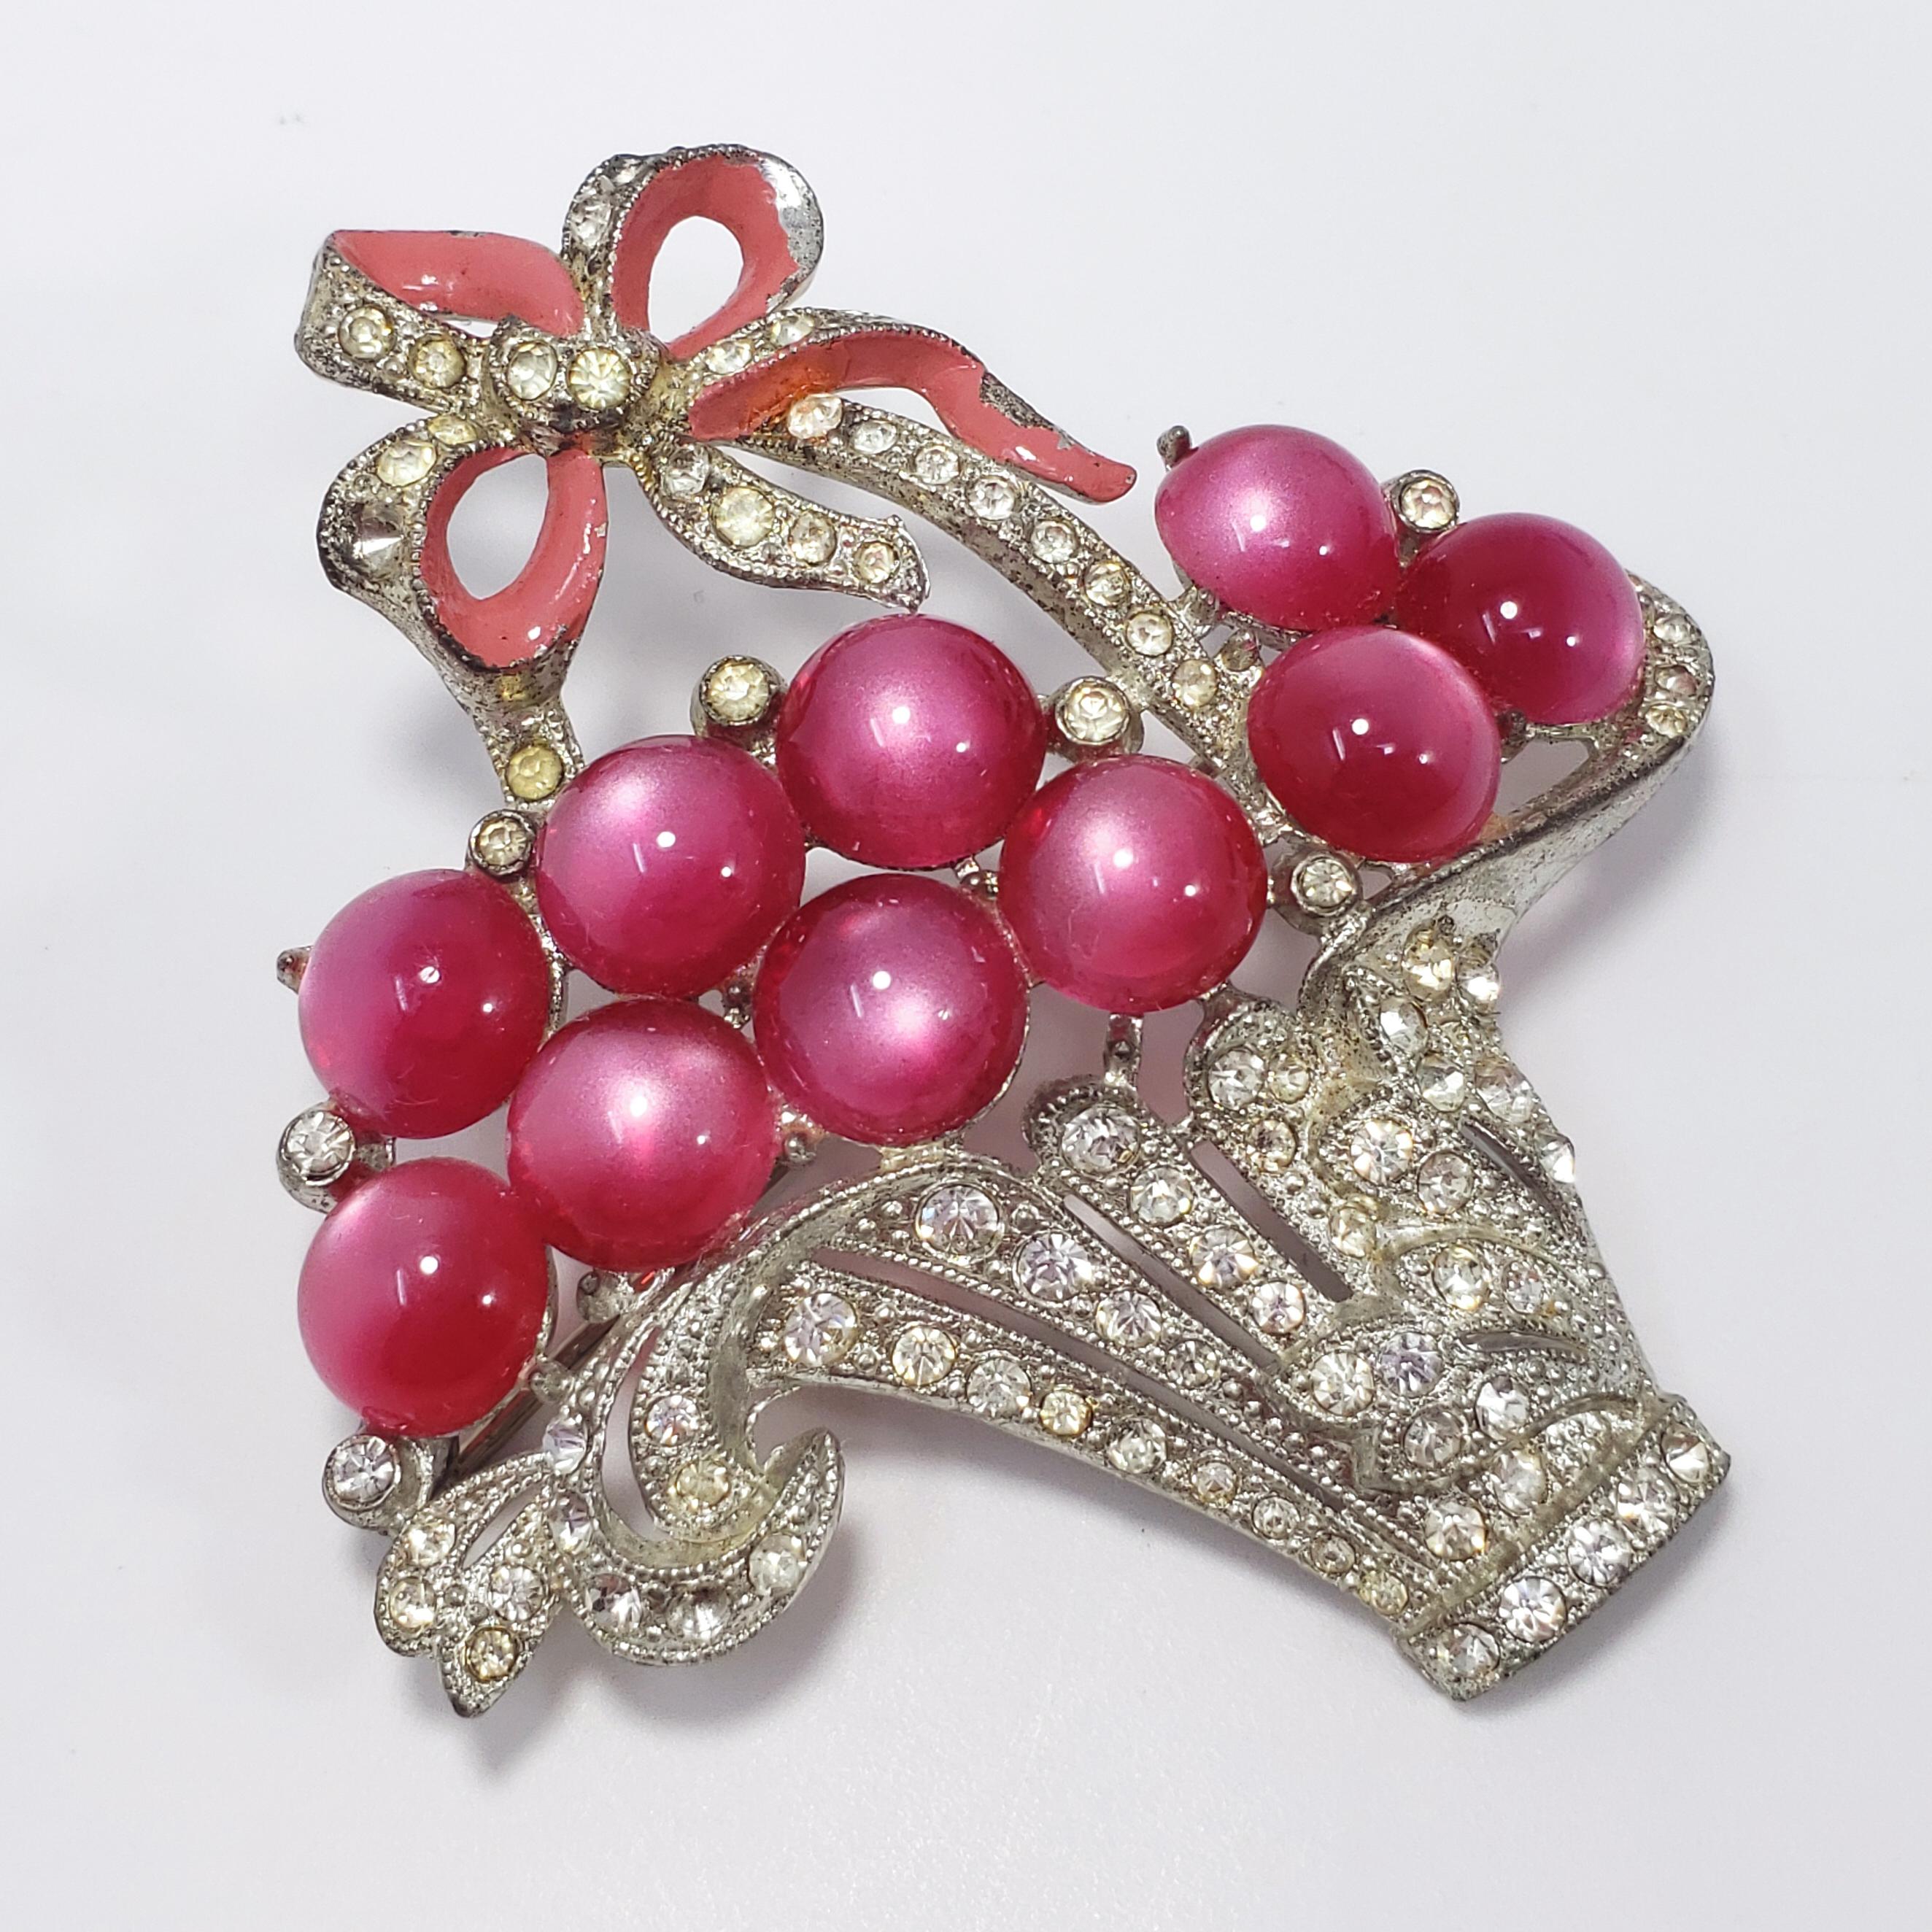 A vintage, circa mid 1900s fruit-basket themed pin/brooch. Features a crystal-encrusted basked filled with round violet moonglow cabochons. Accented with a light-pink enameled bow. Set on vintage pot-metal. A wonderful addition to your costume